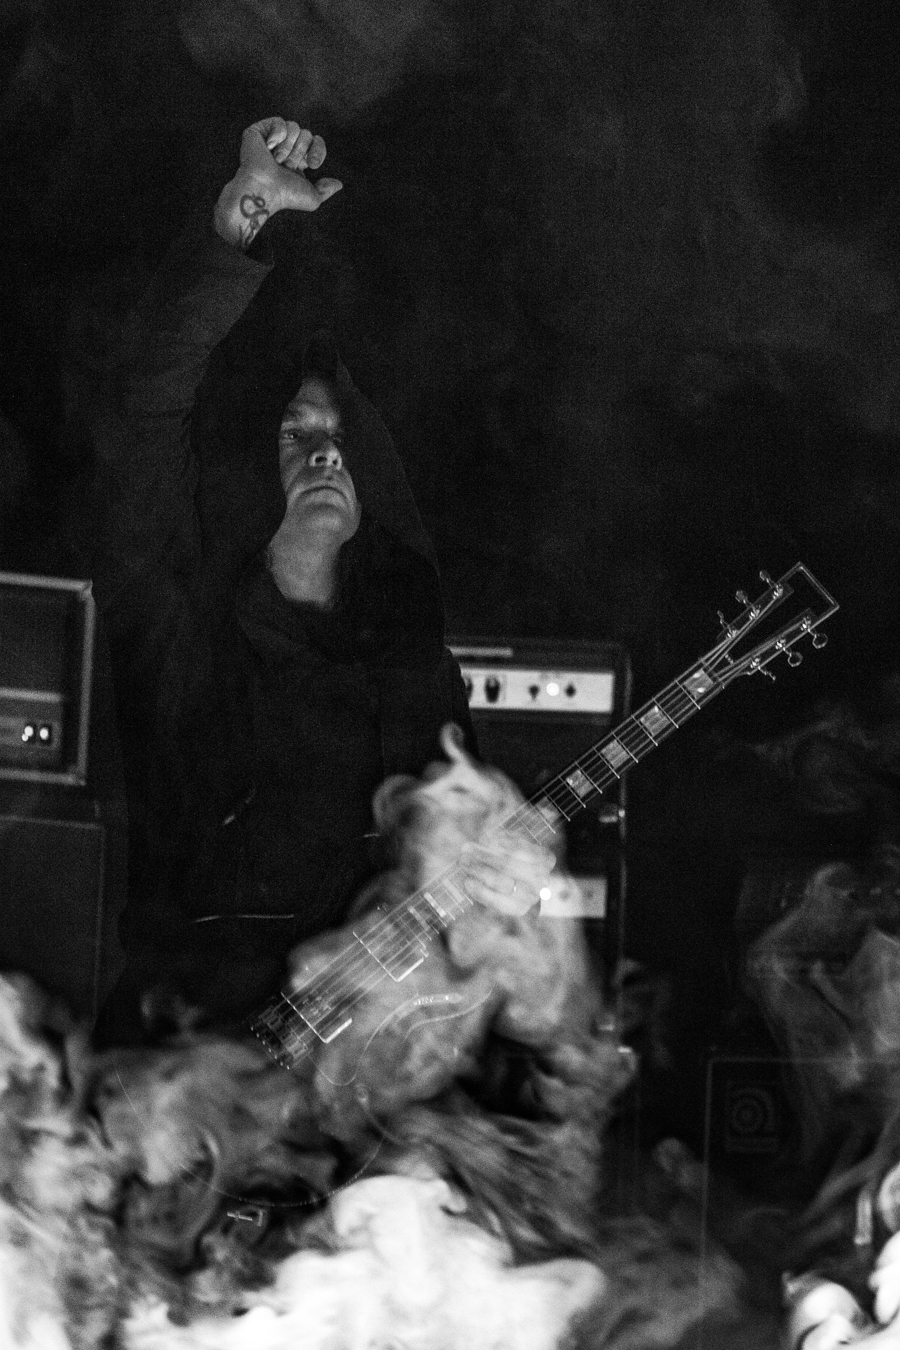 Show Review: The Sunn O))) Show on Nov. 25 Engulfed the Bay Area in a Wall of Sound